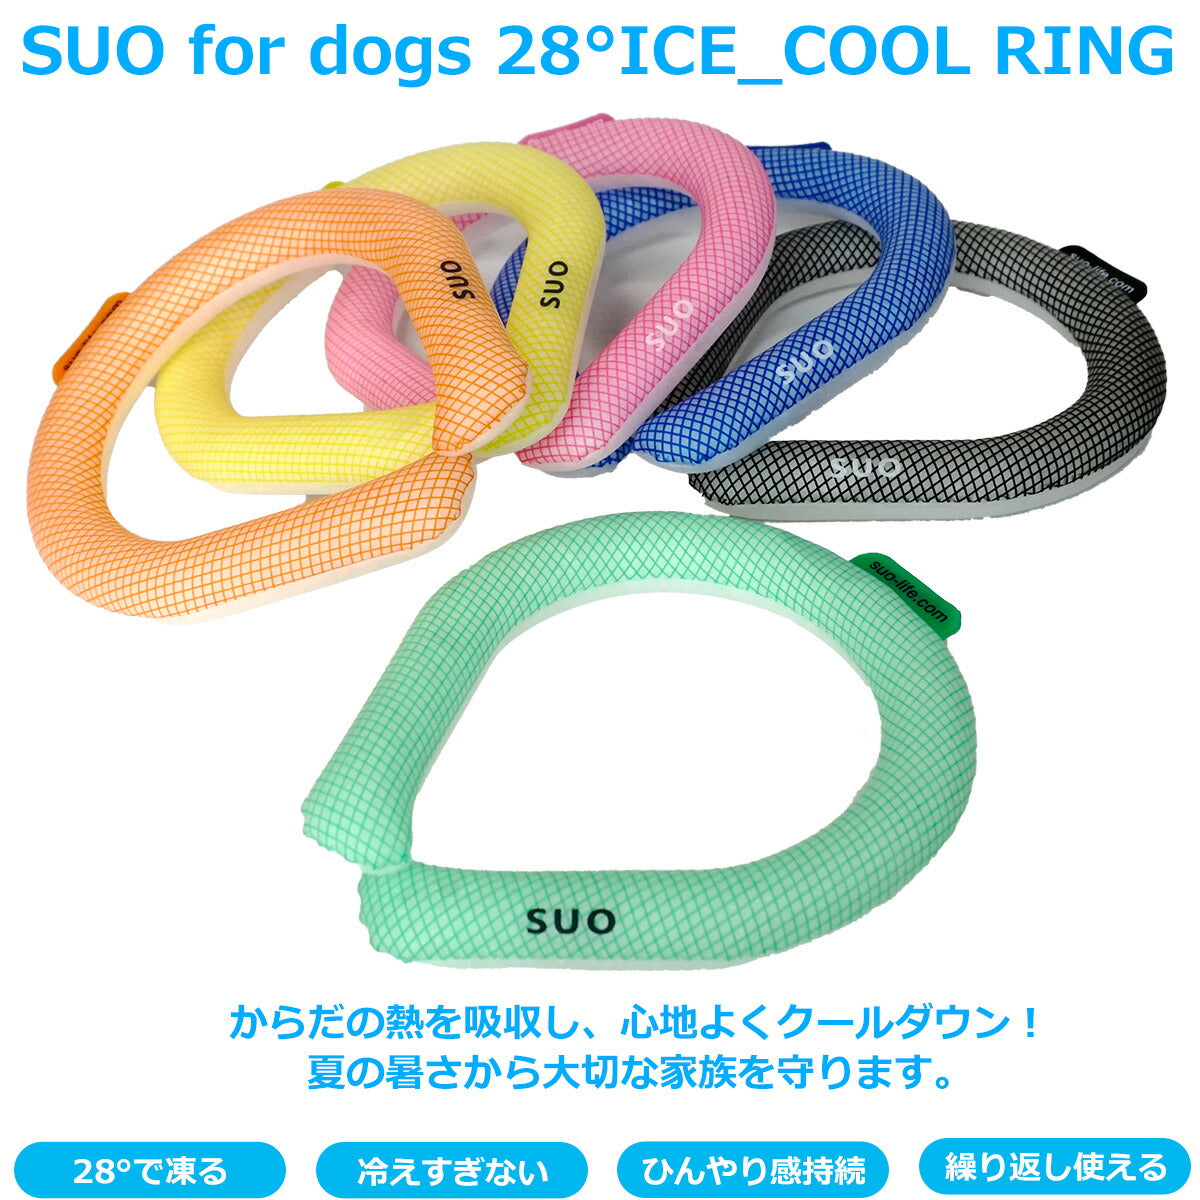 SUO for dogs 28°ICE SUOリング ボタンなし L オレンジ 熱中症対策グッズ 暑さ対策 ひんやり 首 冷感 犬 大人 子供